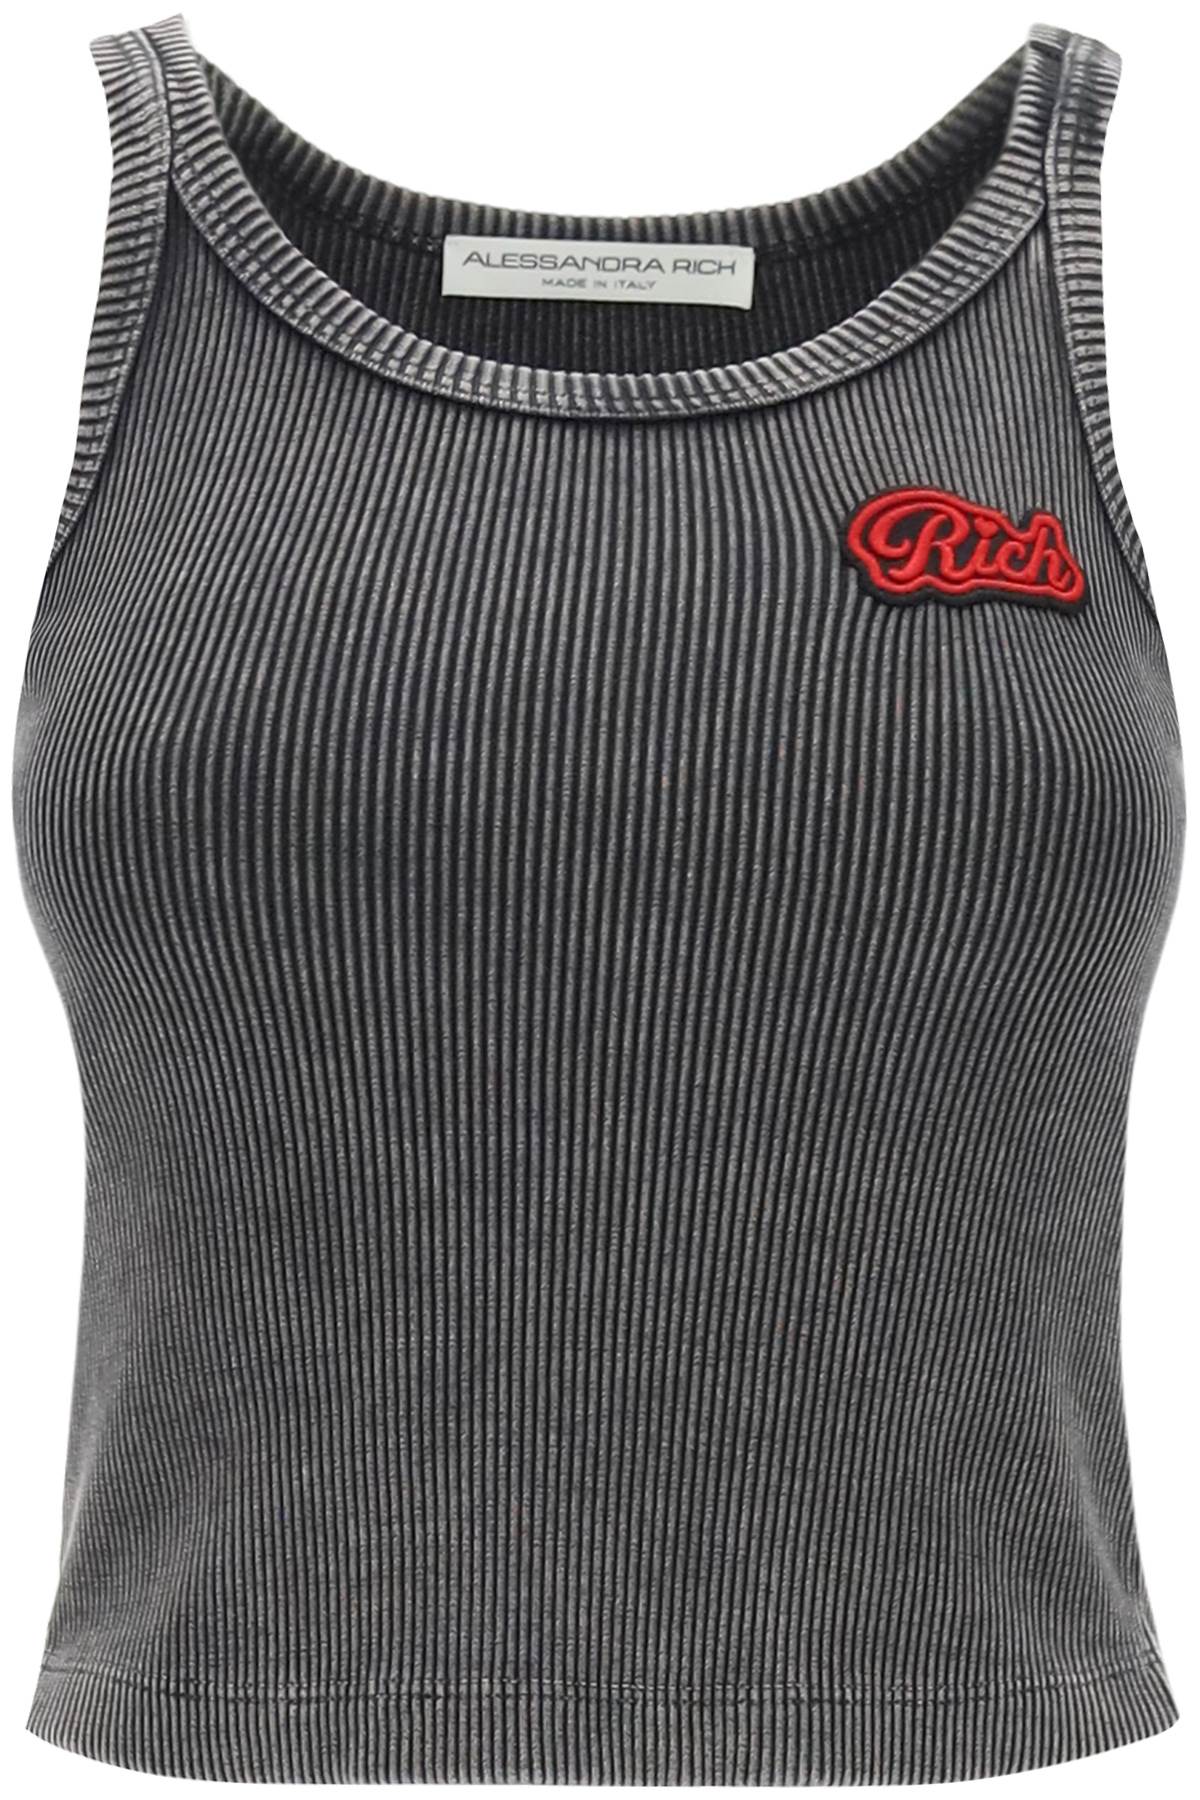 Alessandra rich ribbed tank top with logo patch-0